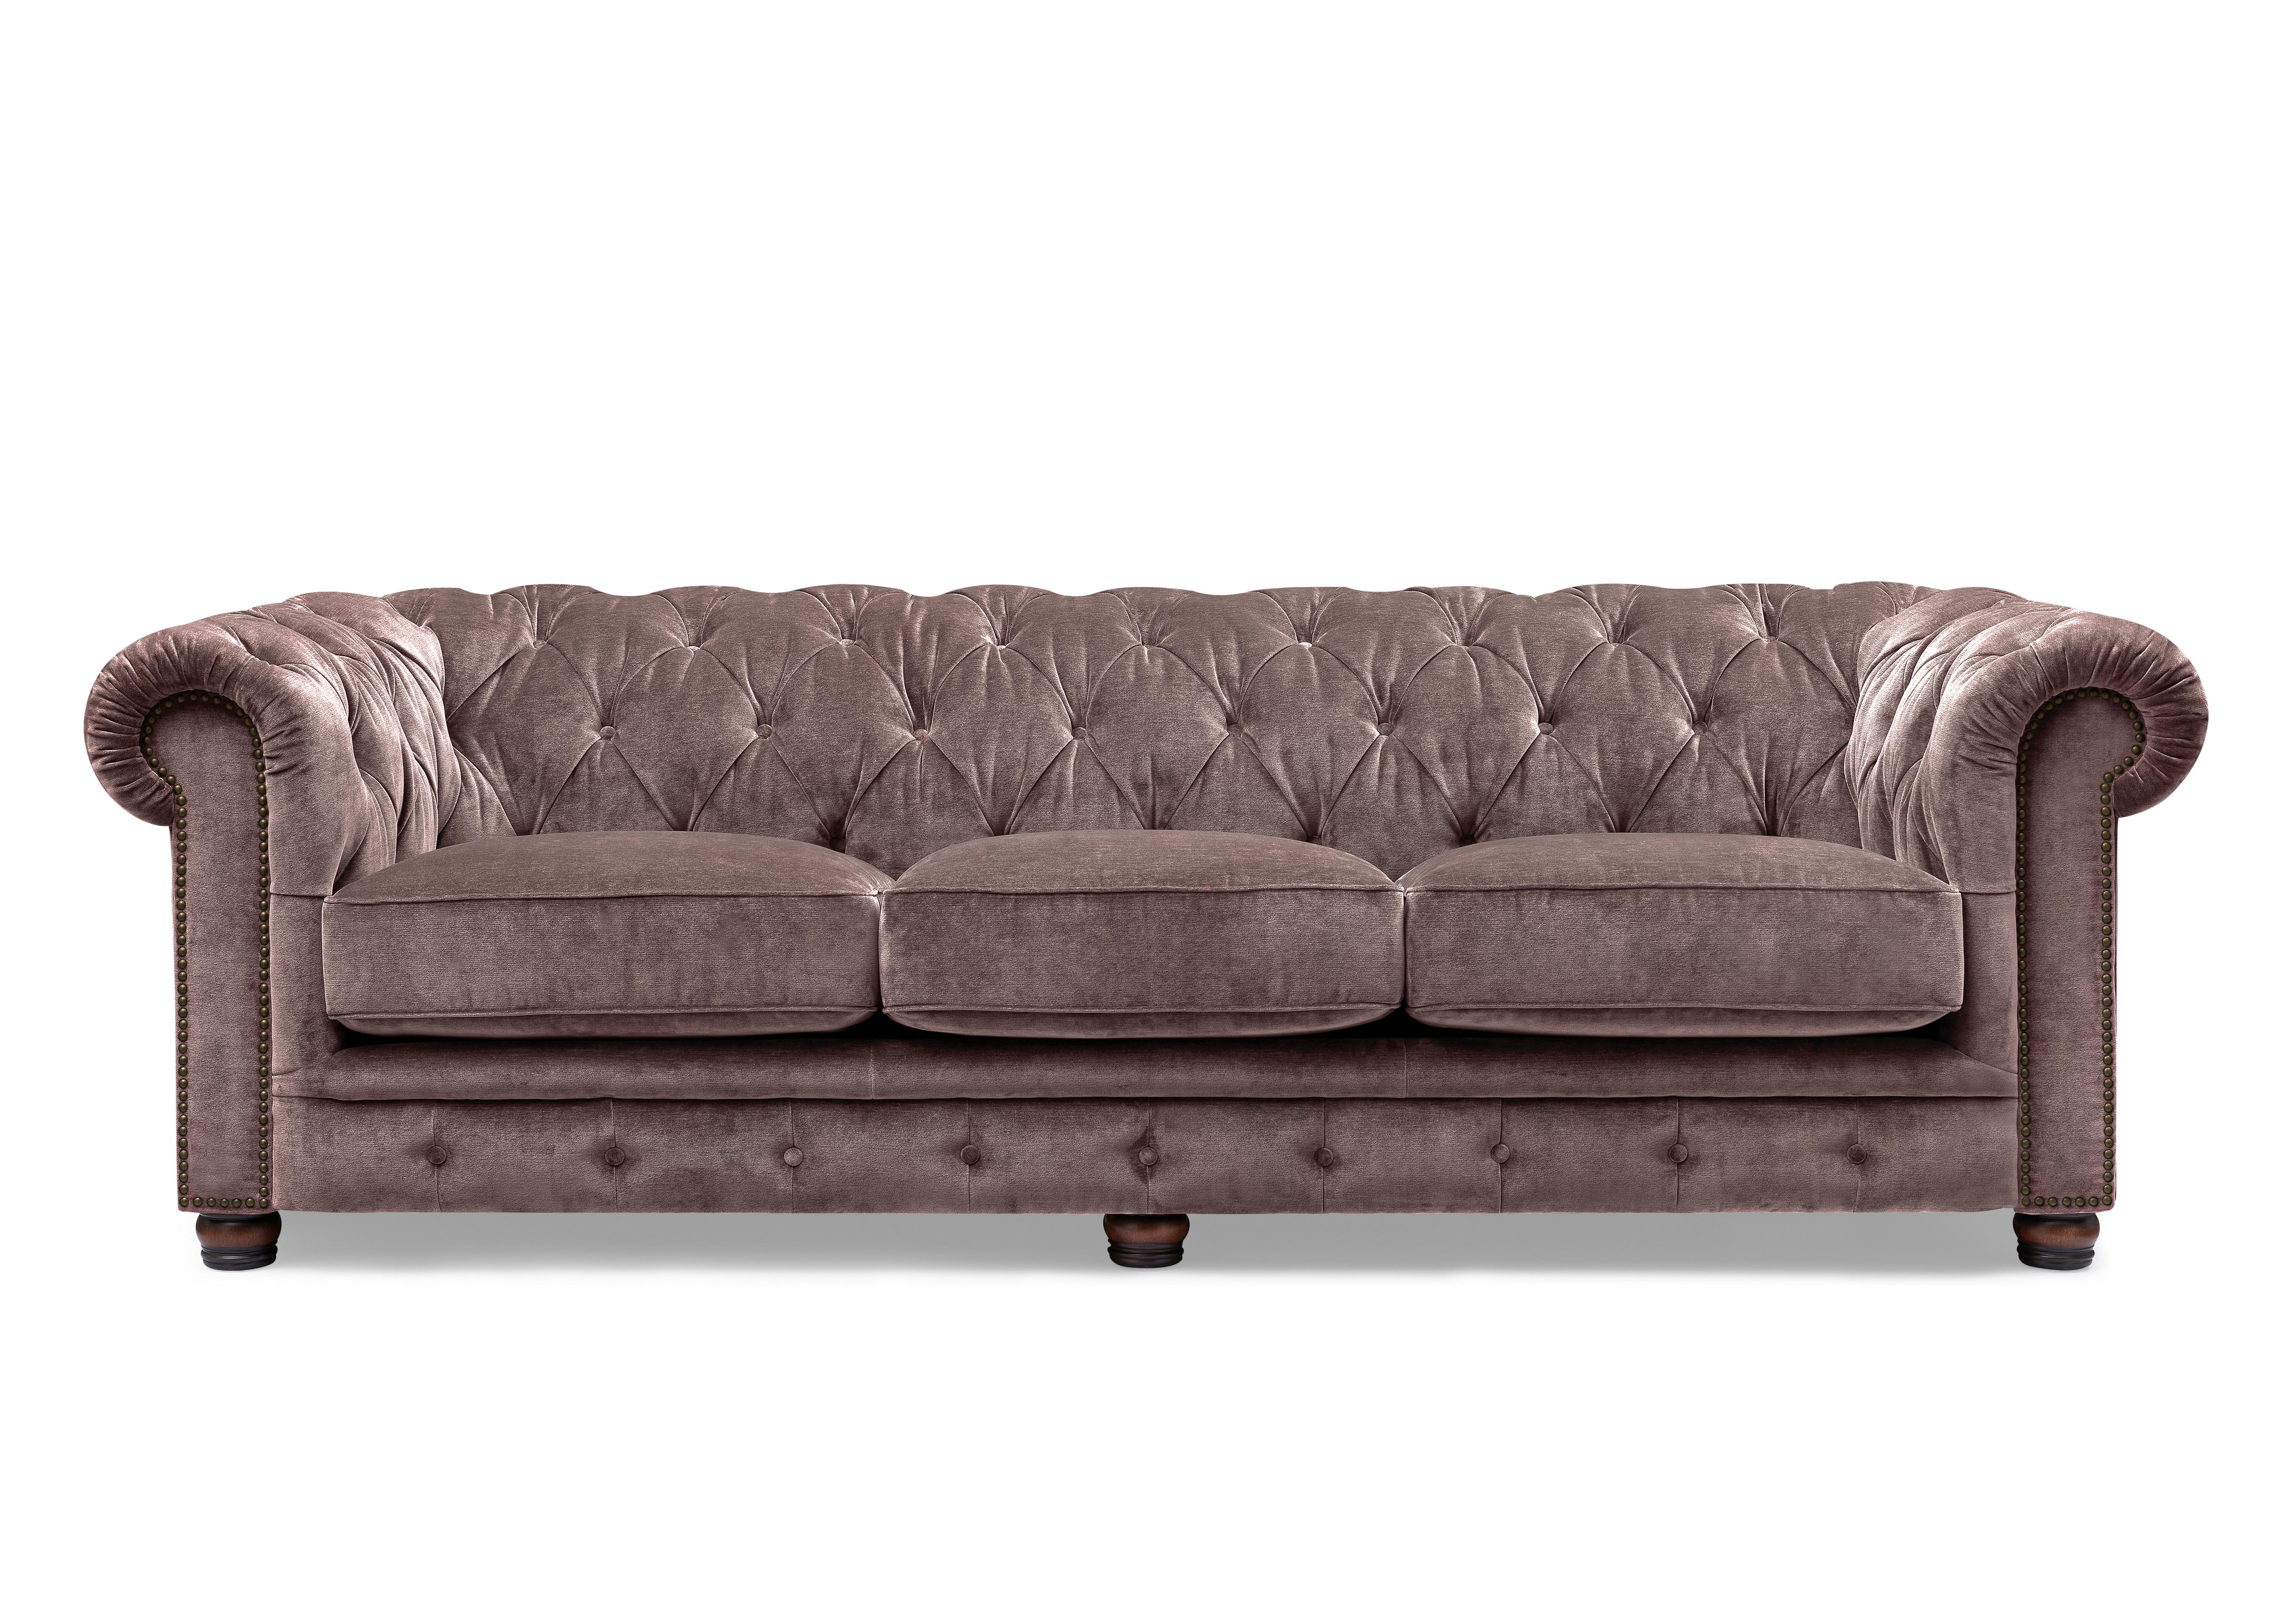 Shackleton 4 Seater Fabric Chesterfield Sofa in X3y1-W023 Antler on Furniture Village